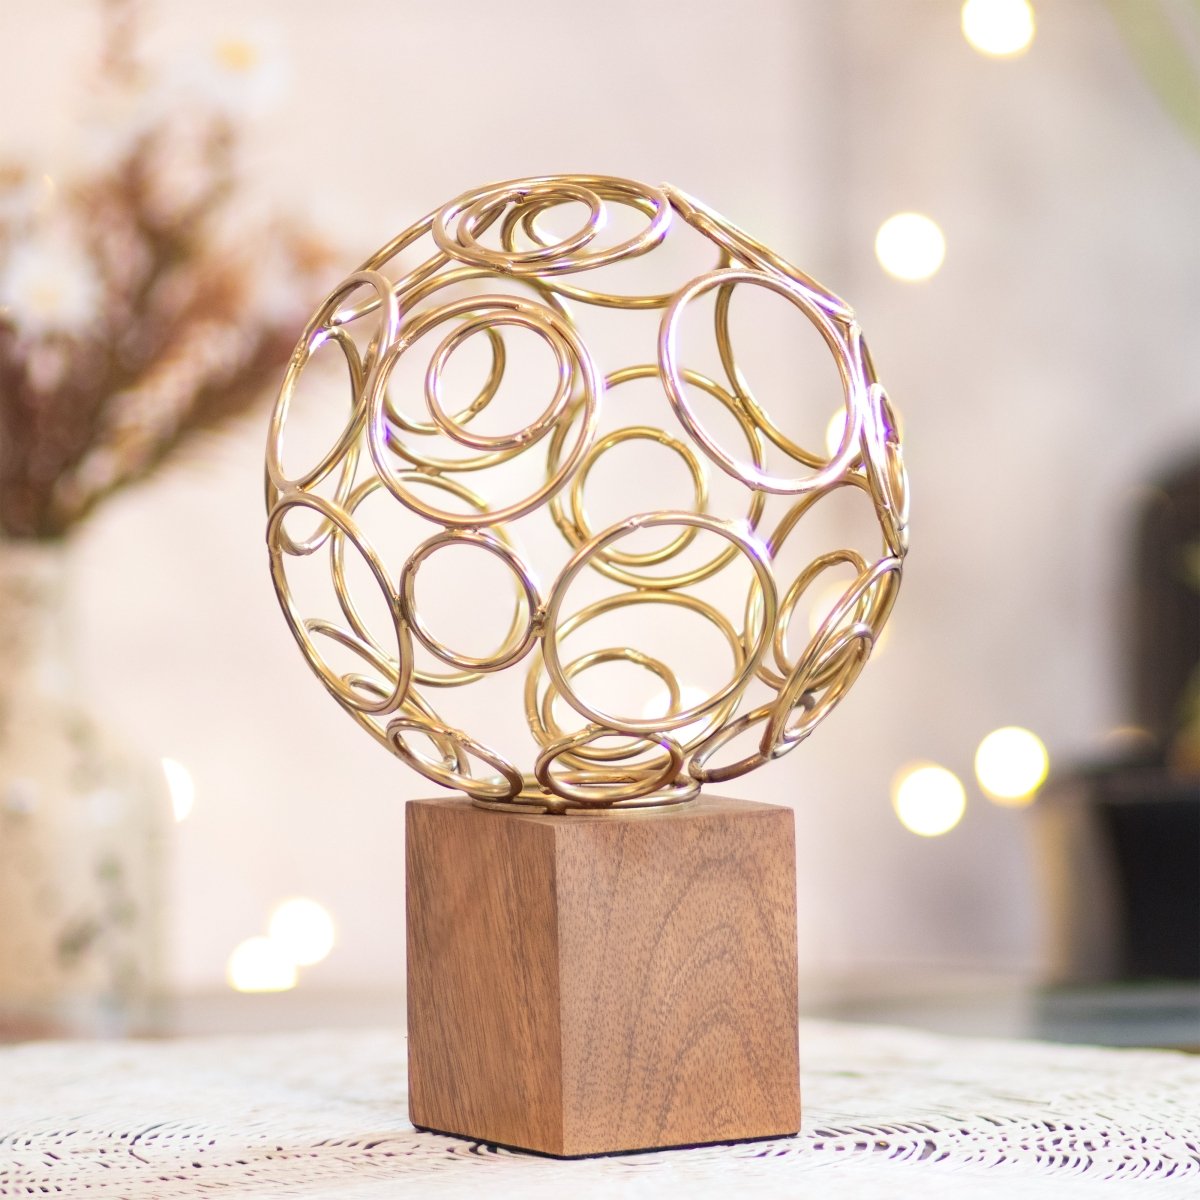 Kezevel Steel Ring Ball Showpiece - Handcrafted Golden Ring Ball Table Accent on Wooden Base, Metal Showpiece for Home Decor